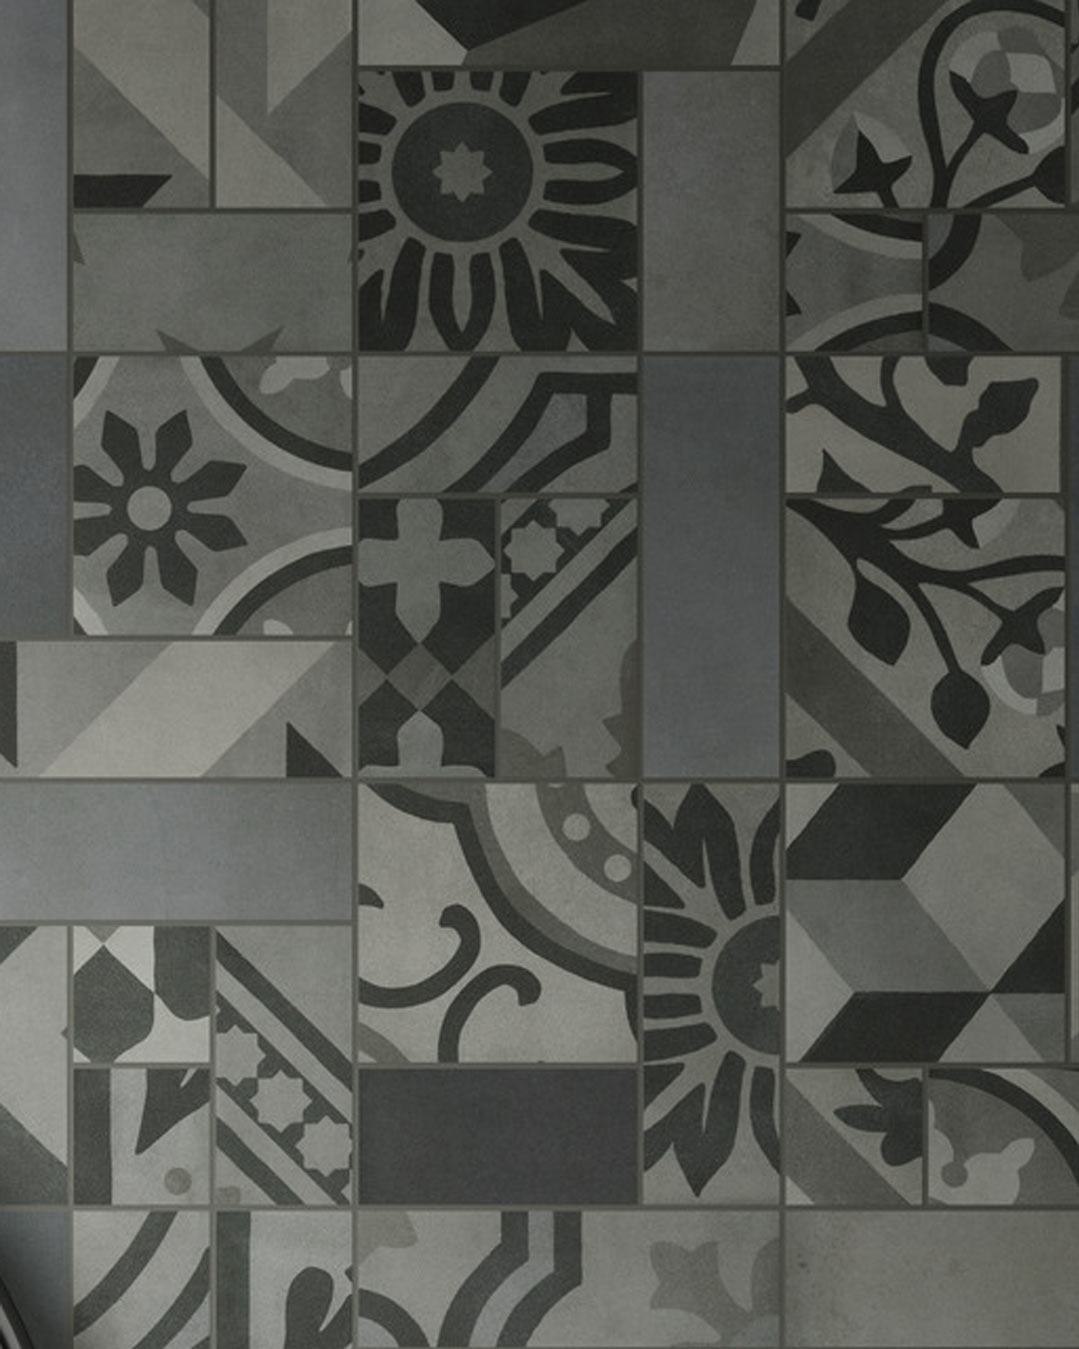 A mosaic of cement tiles creating chromatic alternation.

A minimalist bathroom, but with great scenographic effect. The small size porcelain stoneware D_SEGNI BLEND MOSAICO CARBONE enriches the space and recalls the tradition of handmade cementine.

#Marazzi #MarazziCeramiche #MarazziHumanDesign #MarazziProduct #Ceramic #CeramicTile #Tiles #InteriorDesign #TileInspiration #BespokeInteriors #TilesLover #TileWork #TiledSpaces #TileLife #TileDecor #Crogiolo